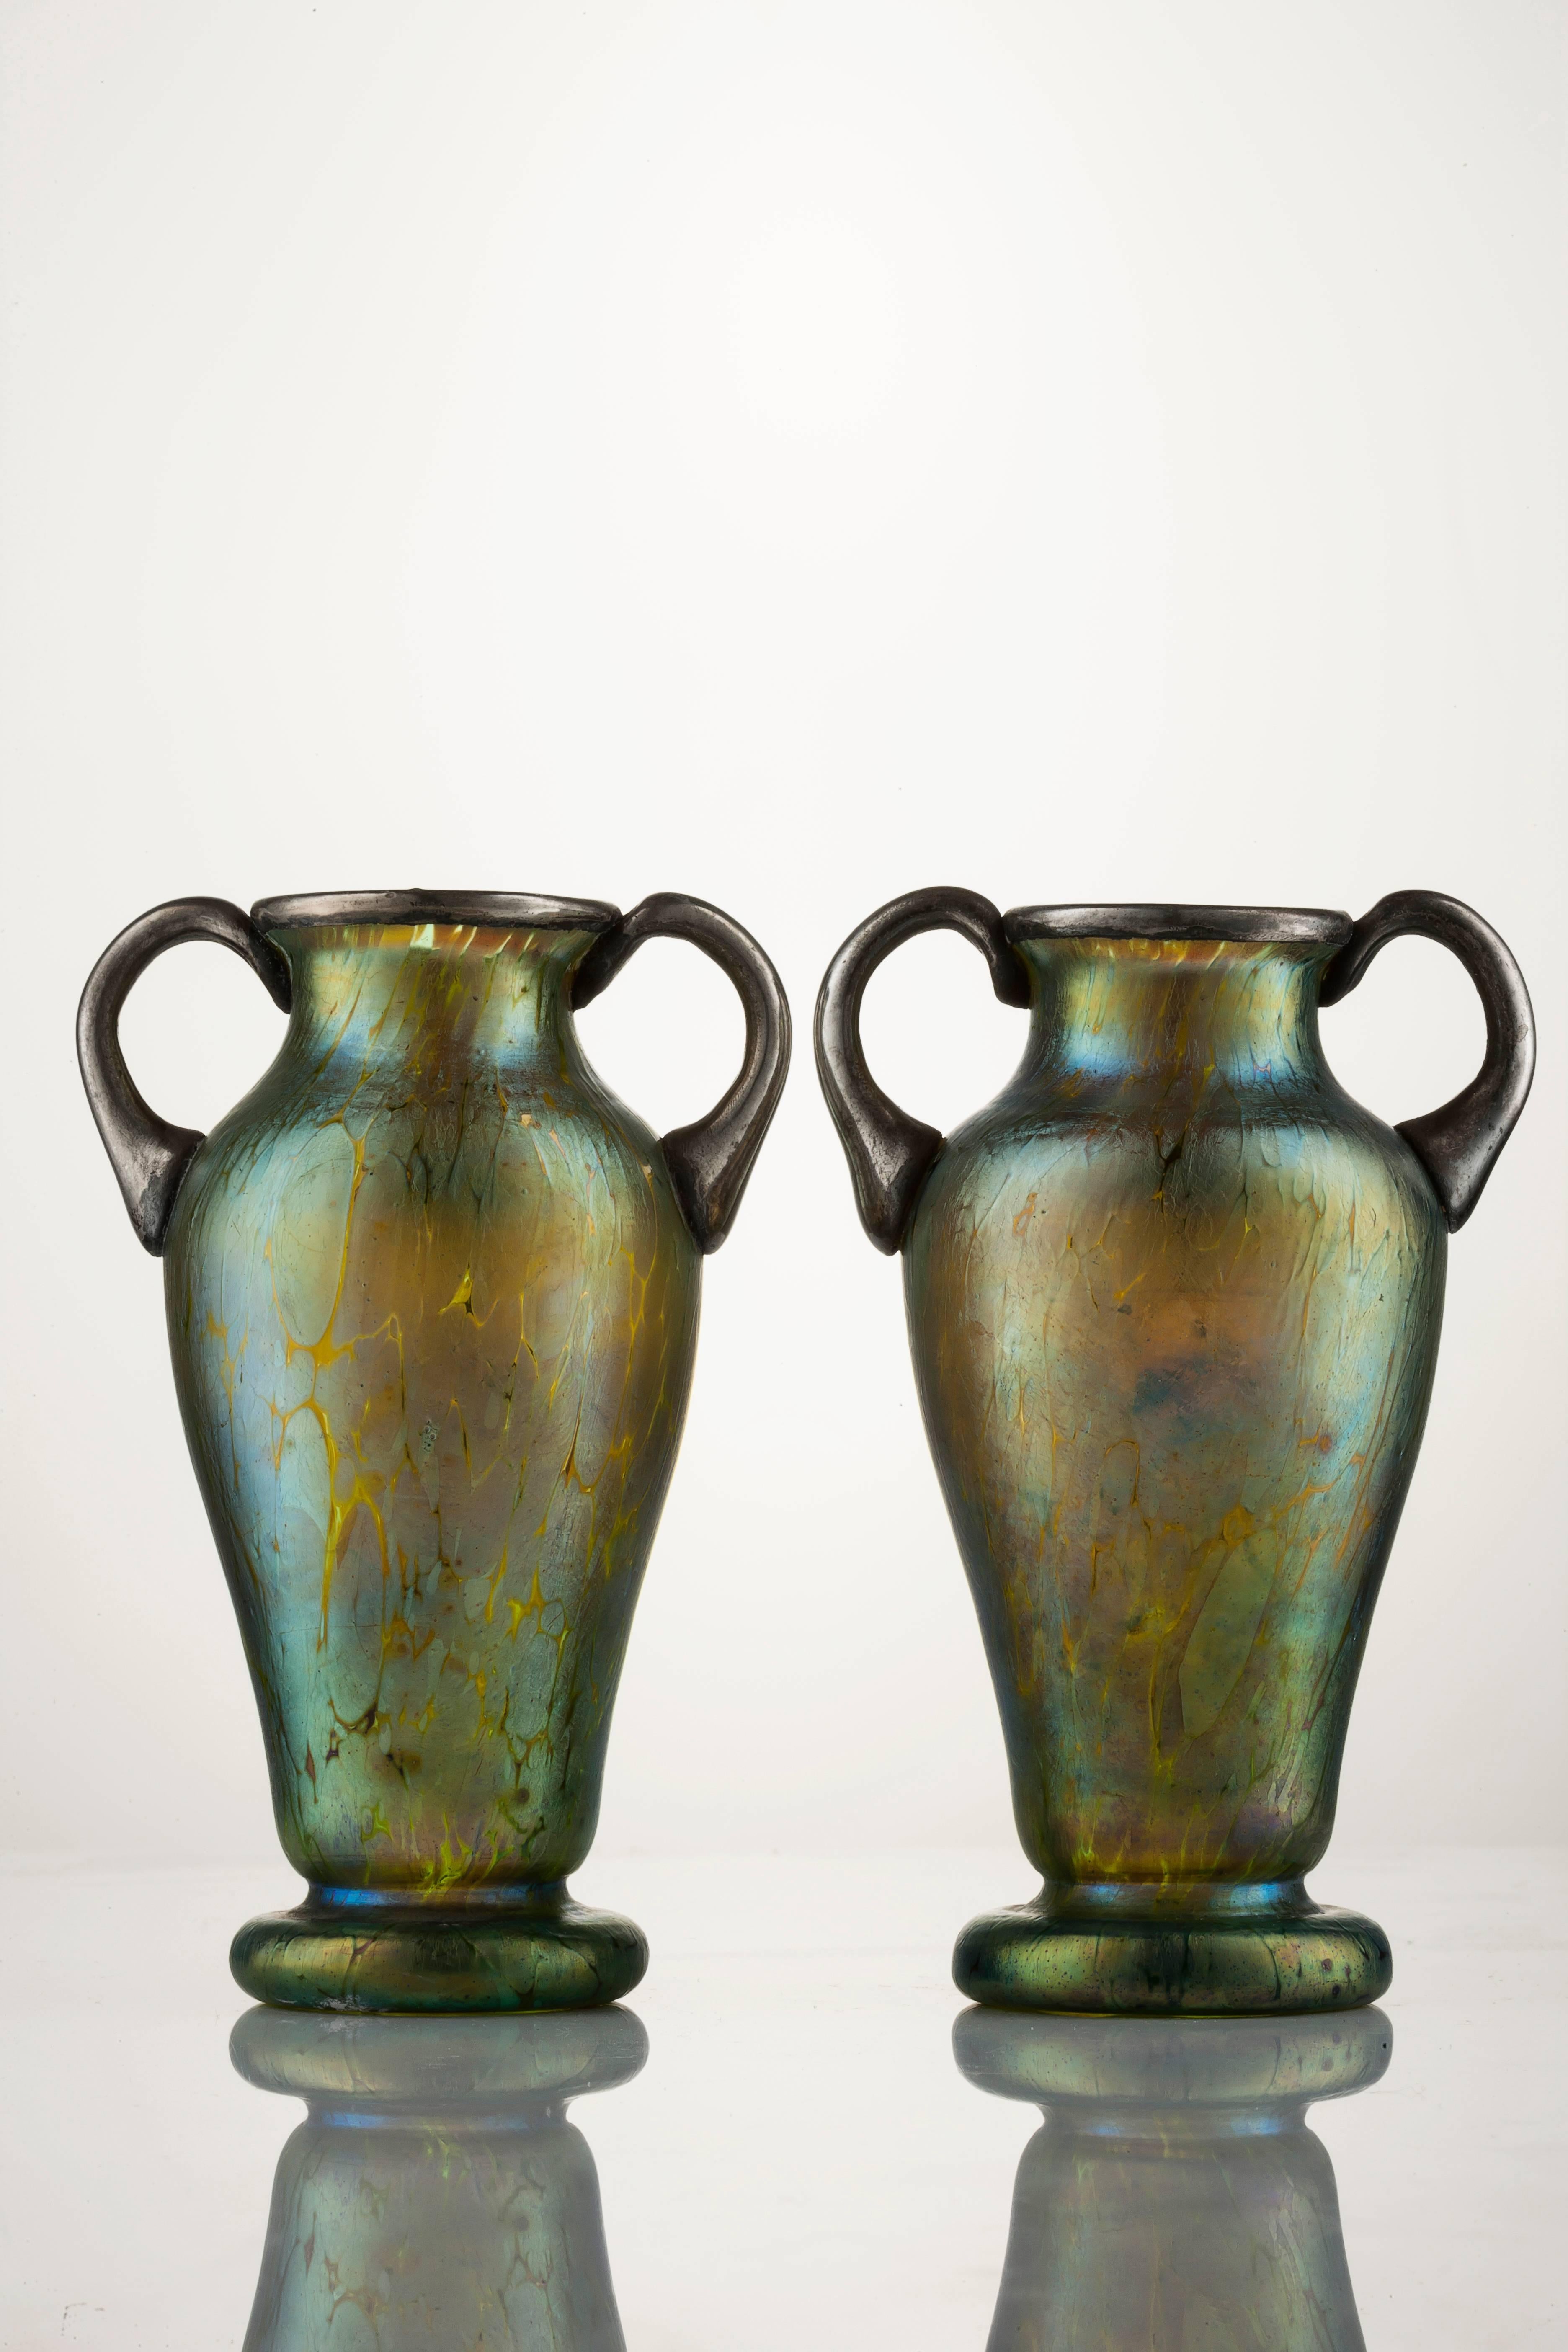 A pair of iridescent glass Amphora vases with a silver Art Nouveau organic floral decoration applied to the body and neck of the vases. This is a fine example of Johann Loetz from 1900.
     